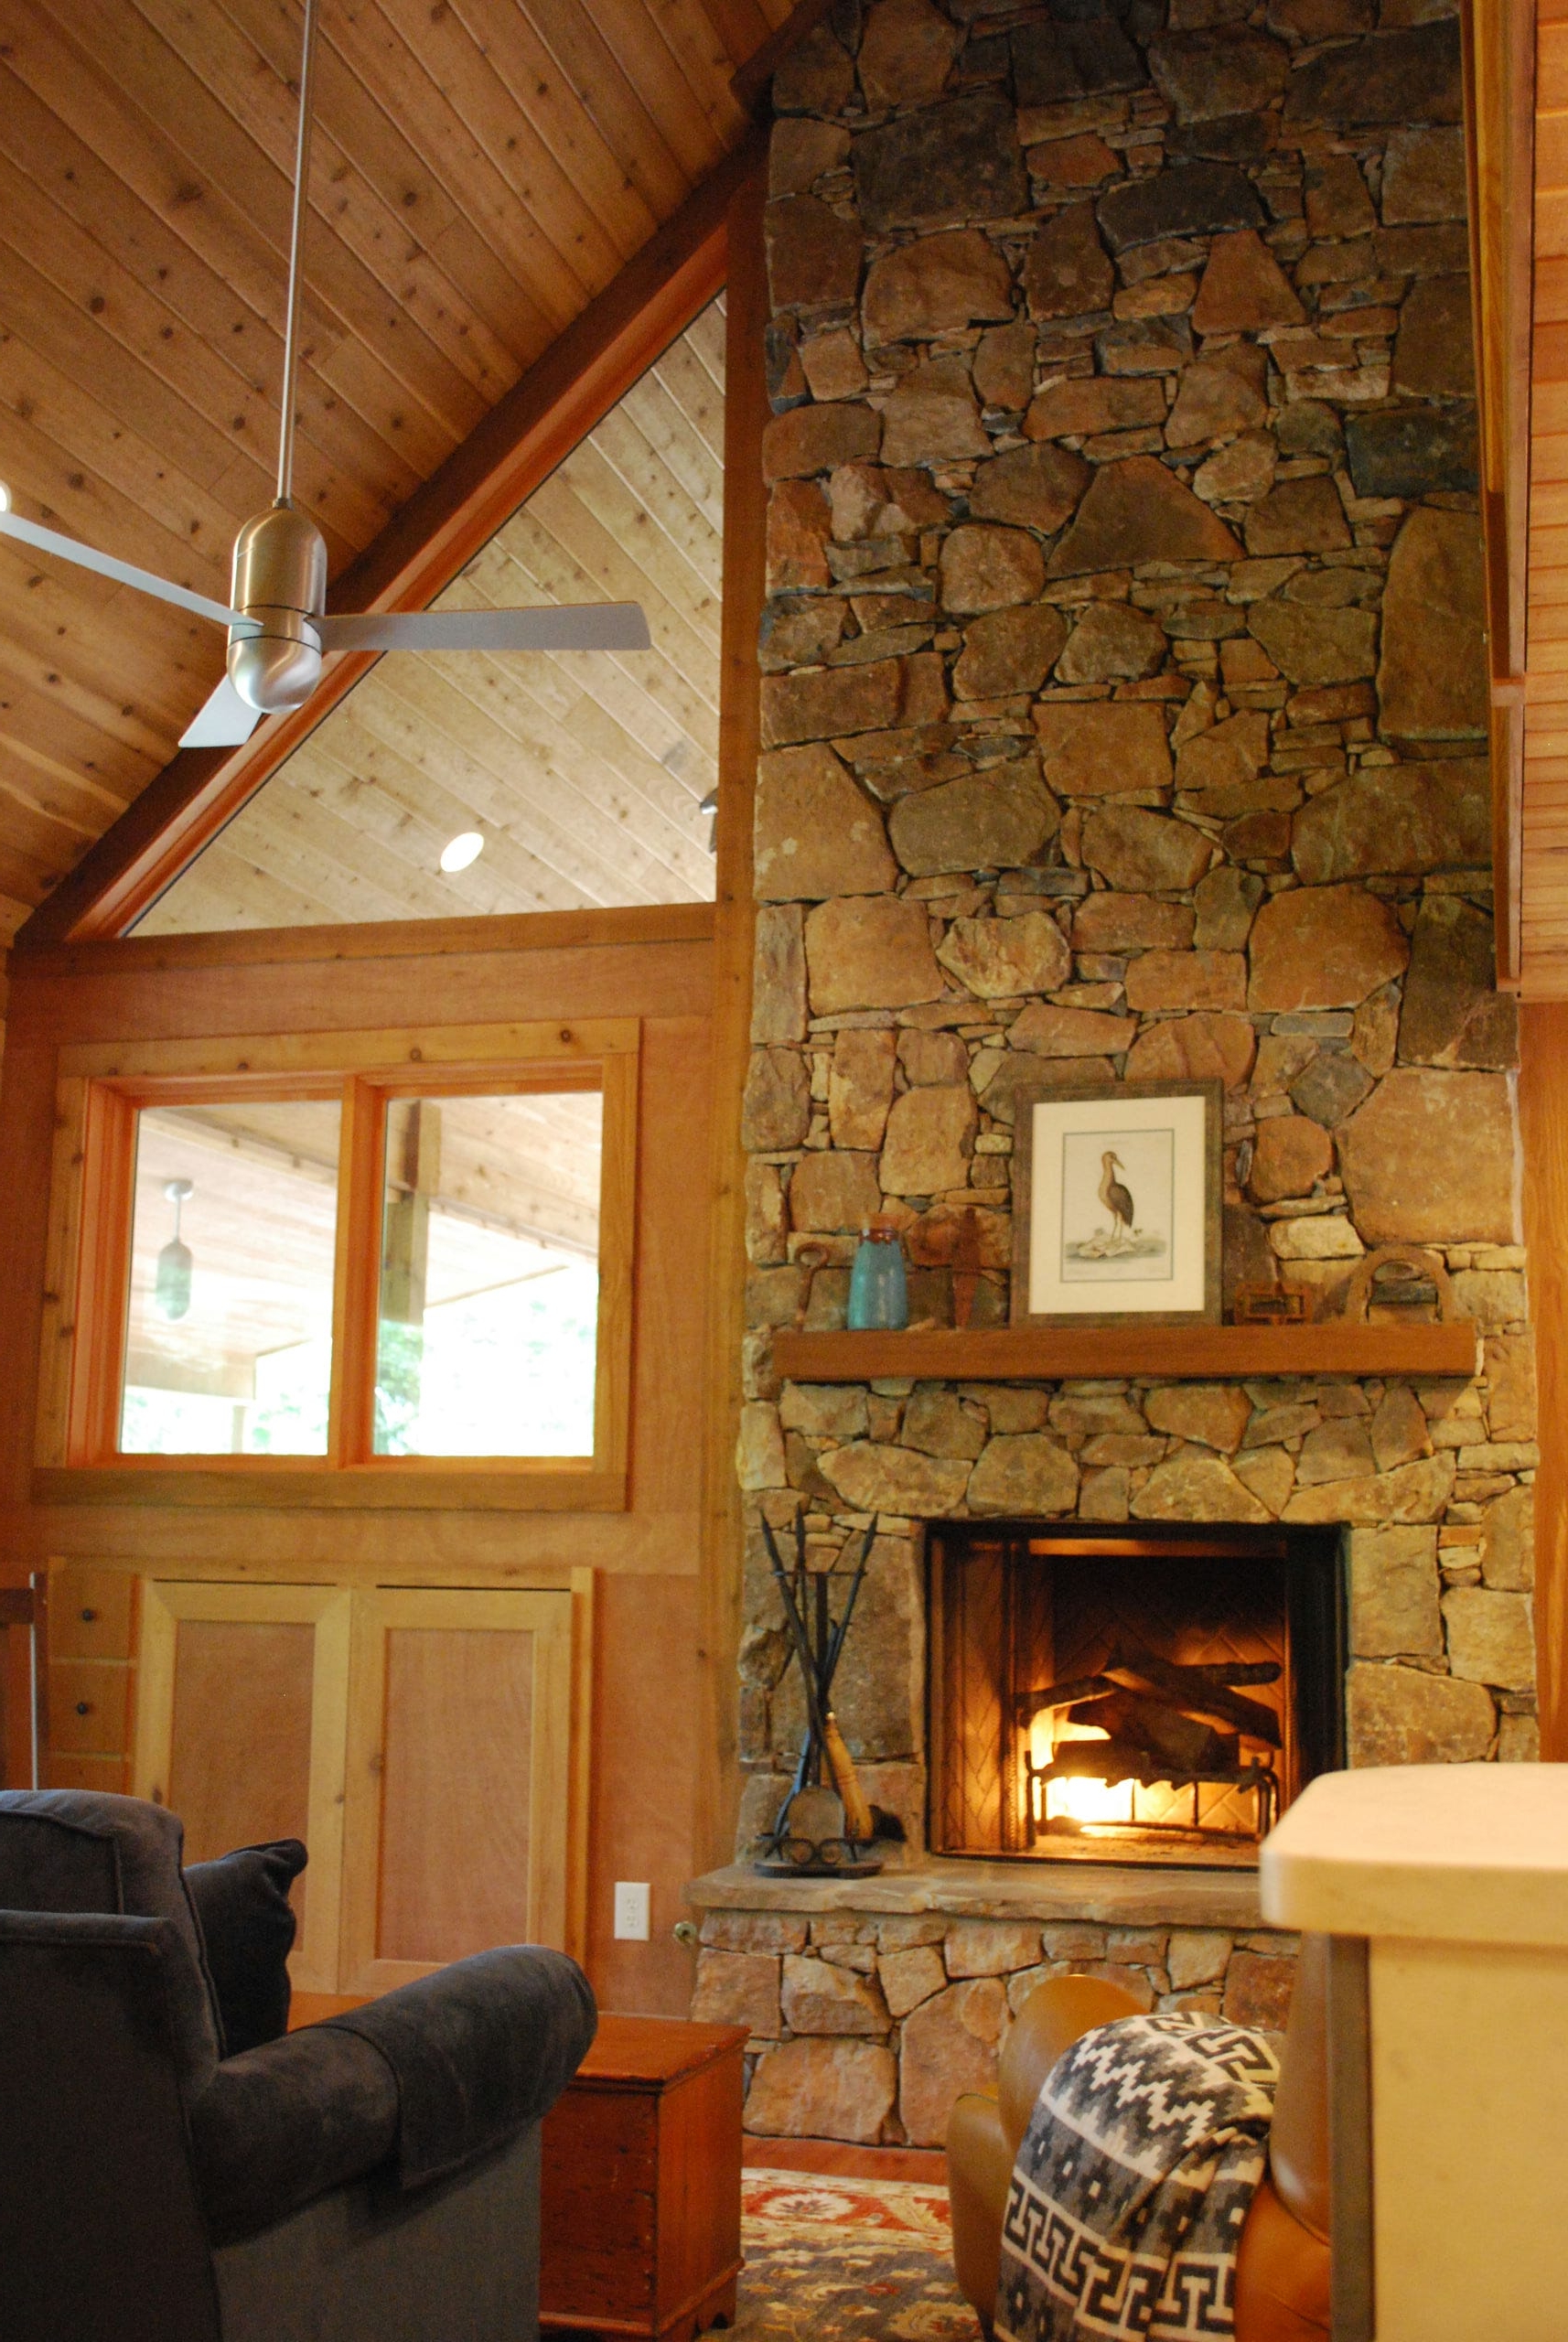 Warm interior space with vaulted wood ceilings and stone fireplace